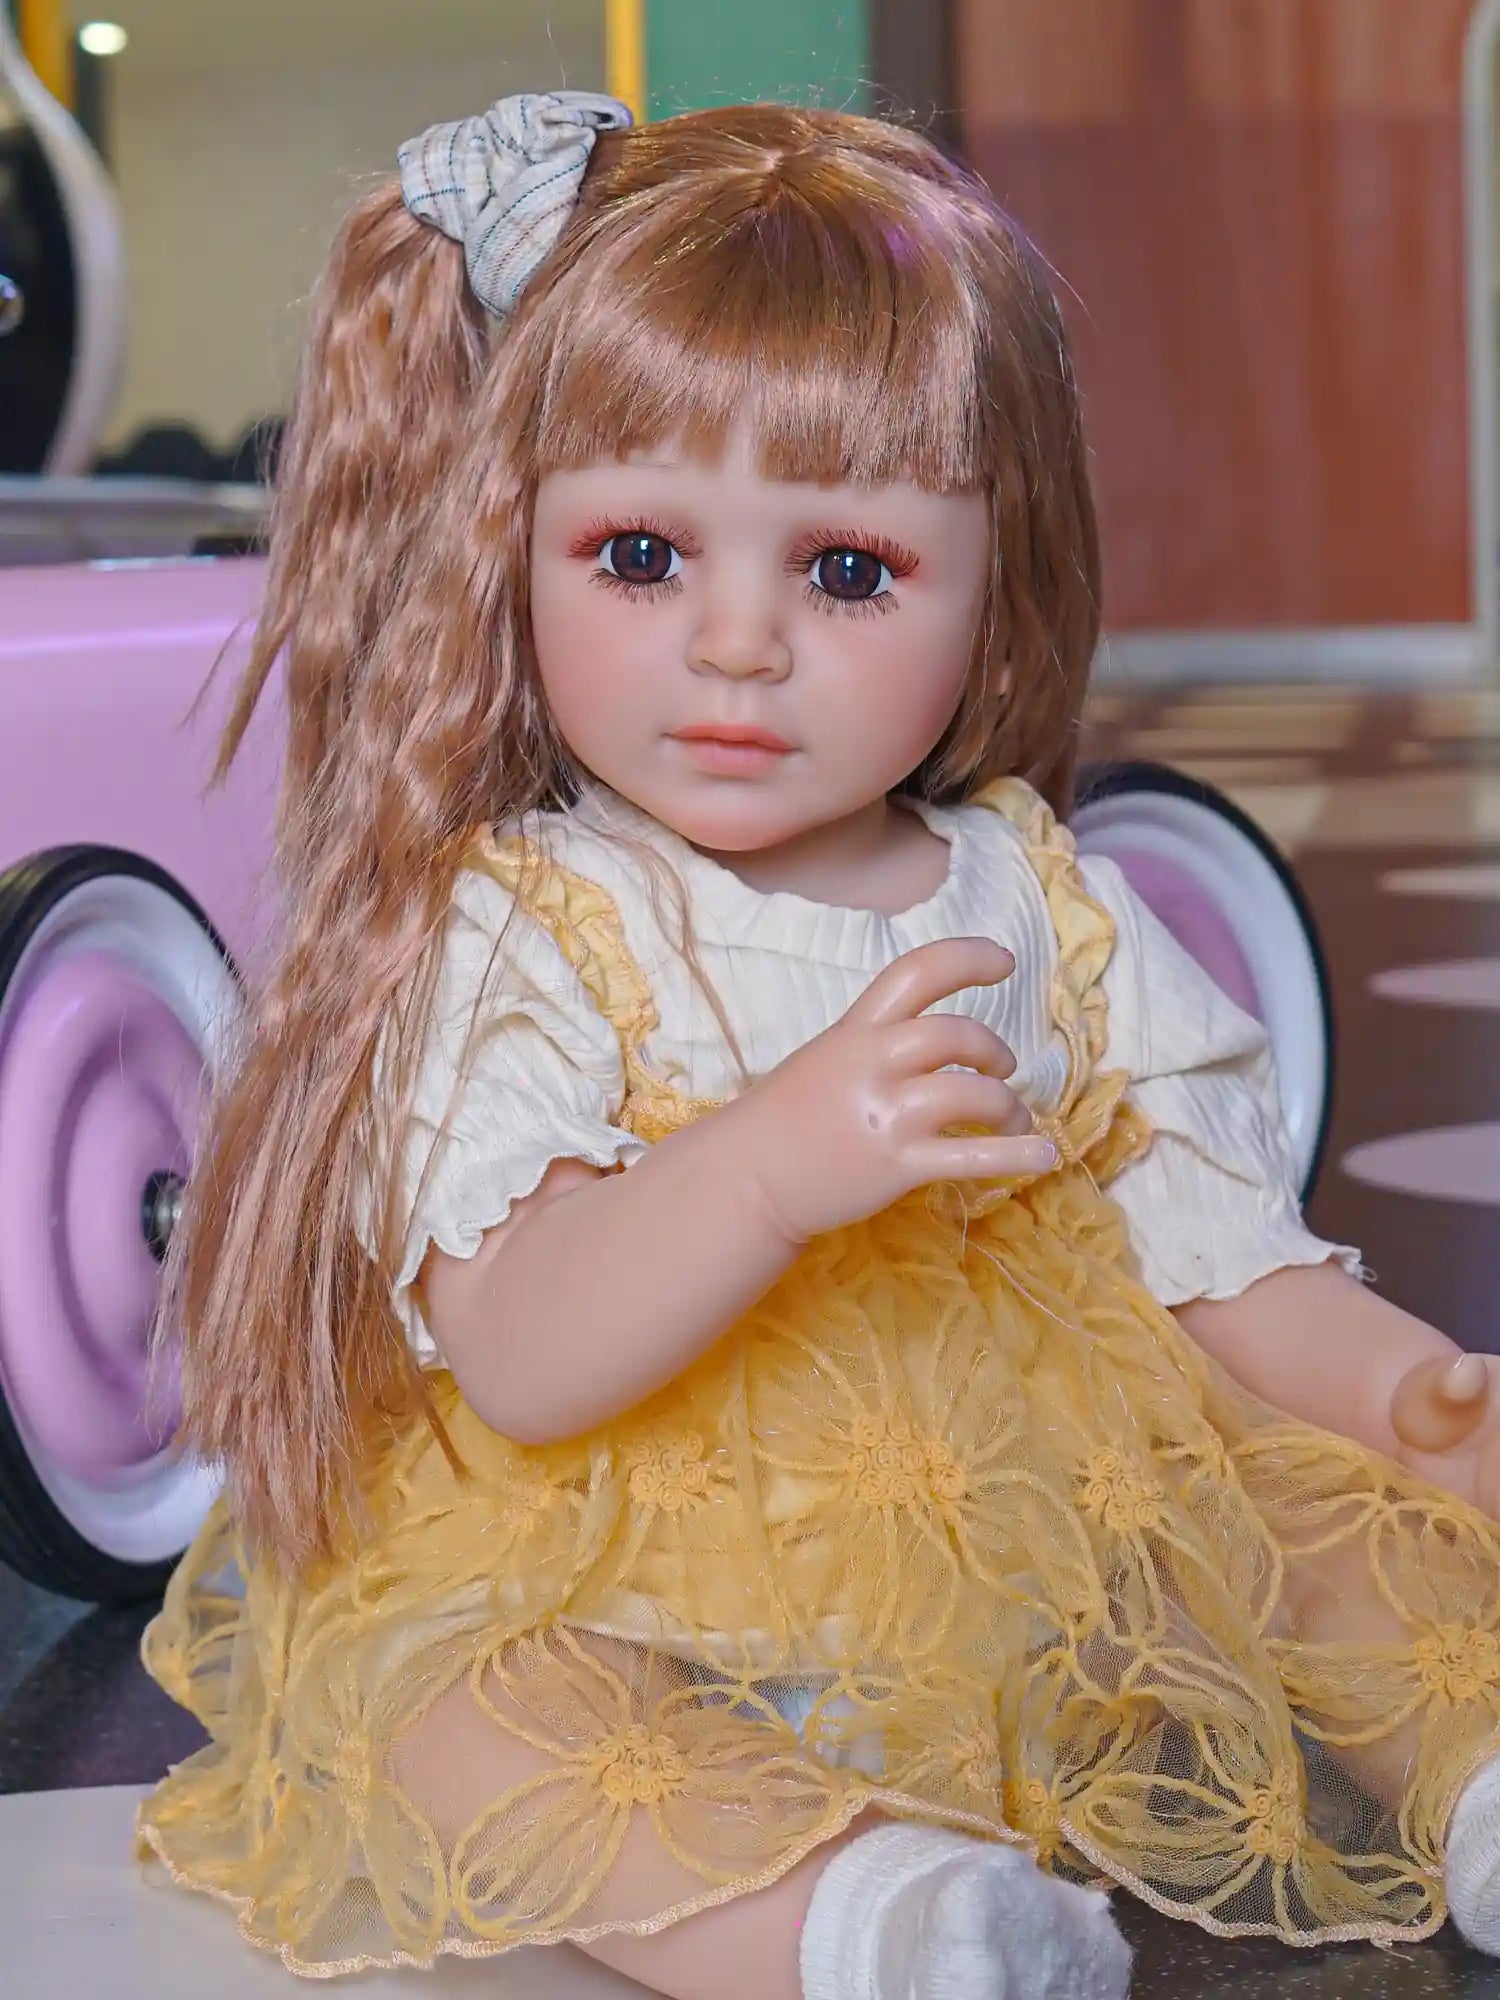 Lifelike doll showcasing large blue eyes, styled in a mustard-colored dress with detailed embroidery, in a playful setting.